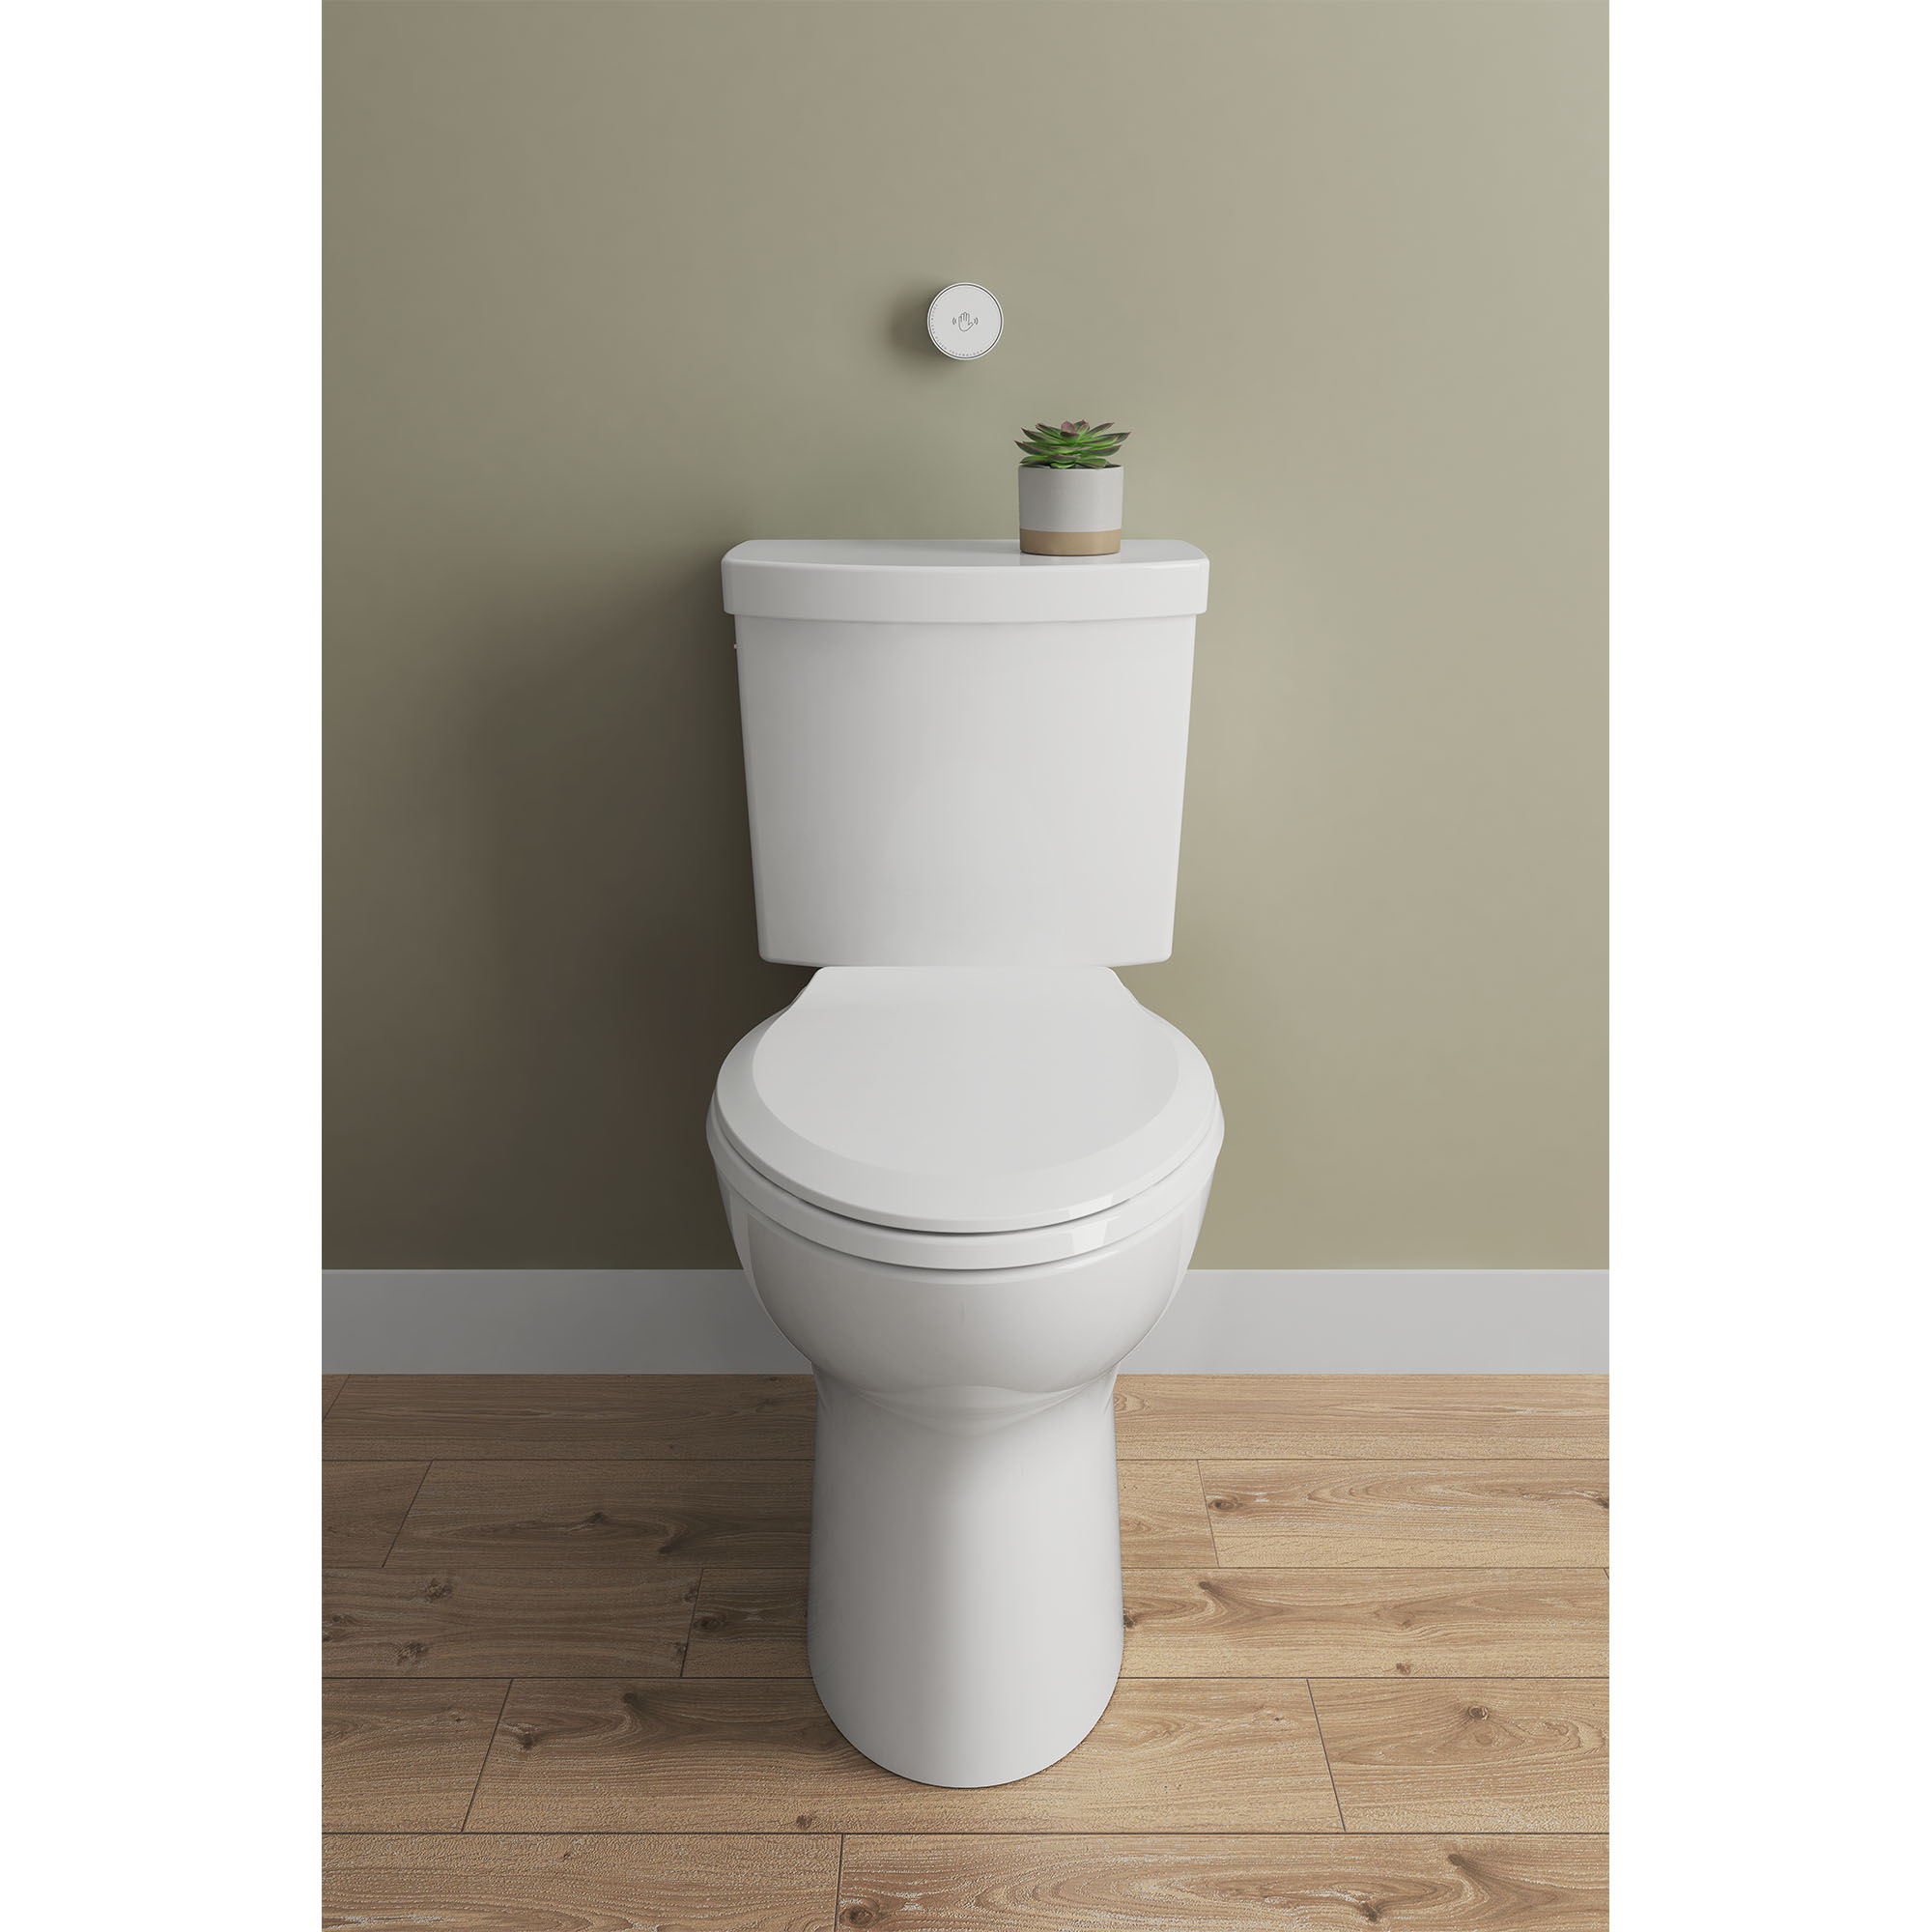 Cadet Touchless 1.28 gpf Single Flush Toilet Tank Only with Locking Device